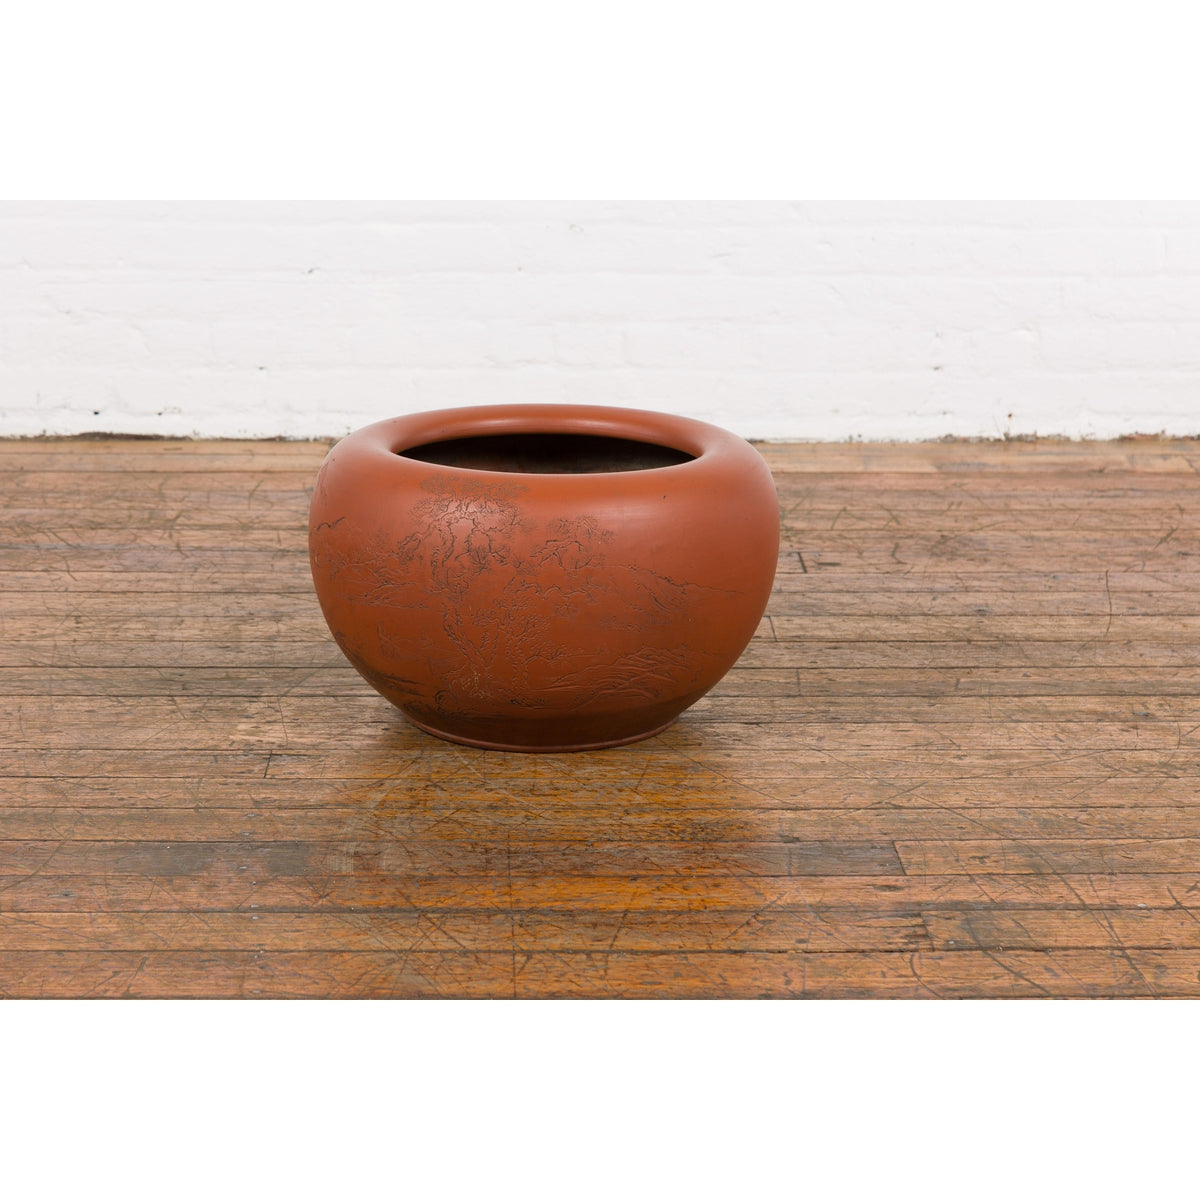 Orange Circular Antique Planter with Etched Design-YN7819-2. Asian & Chinese Furniture, Art, Antiques, Vintage Home Décor for sale at FEA Home